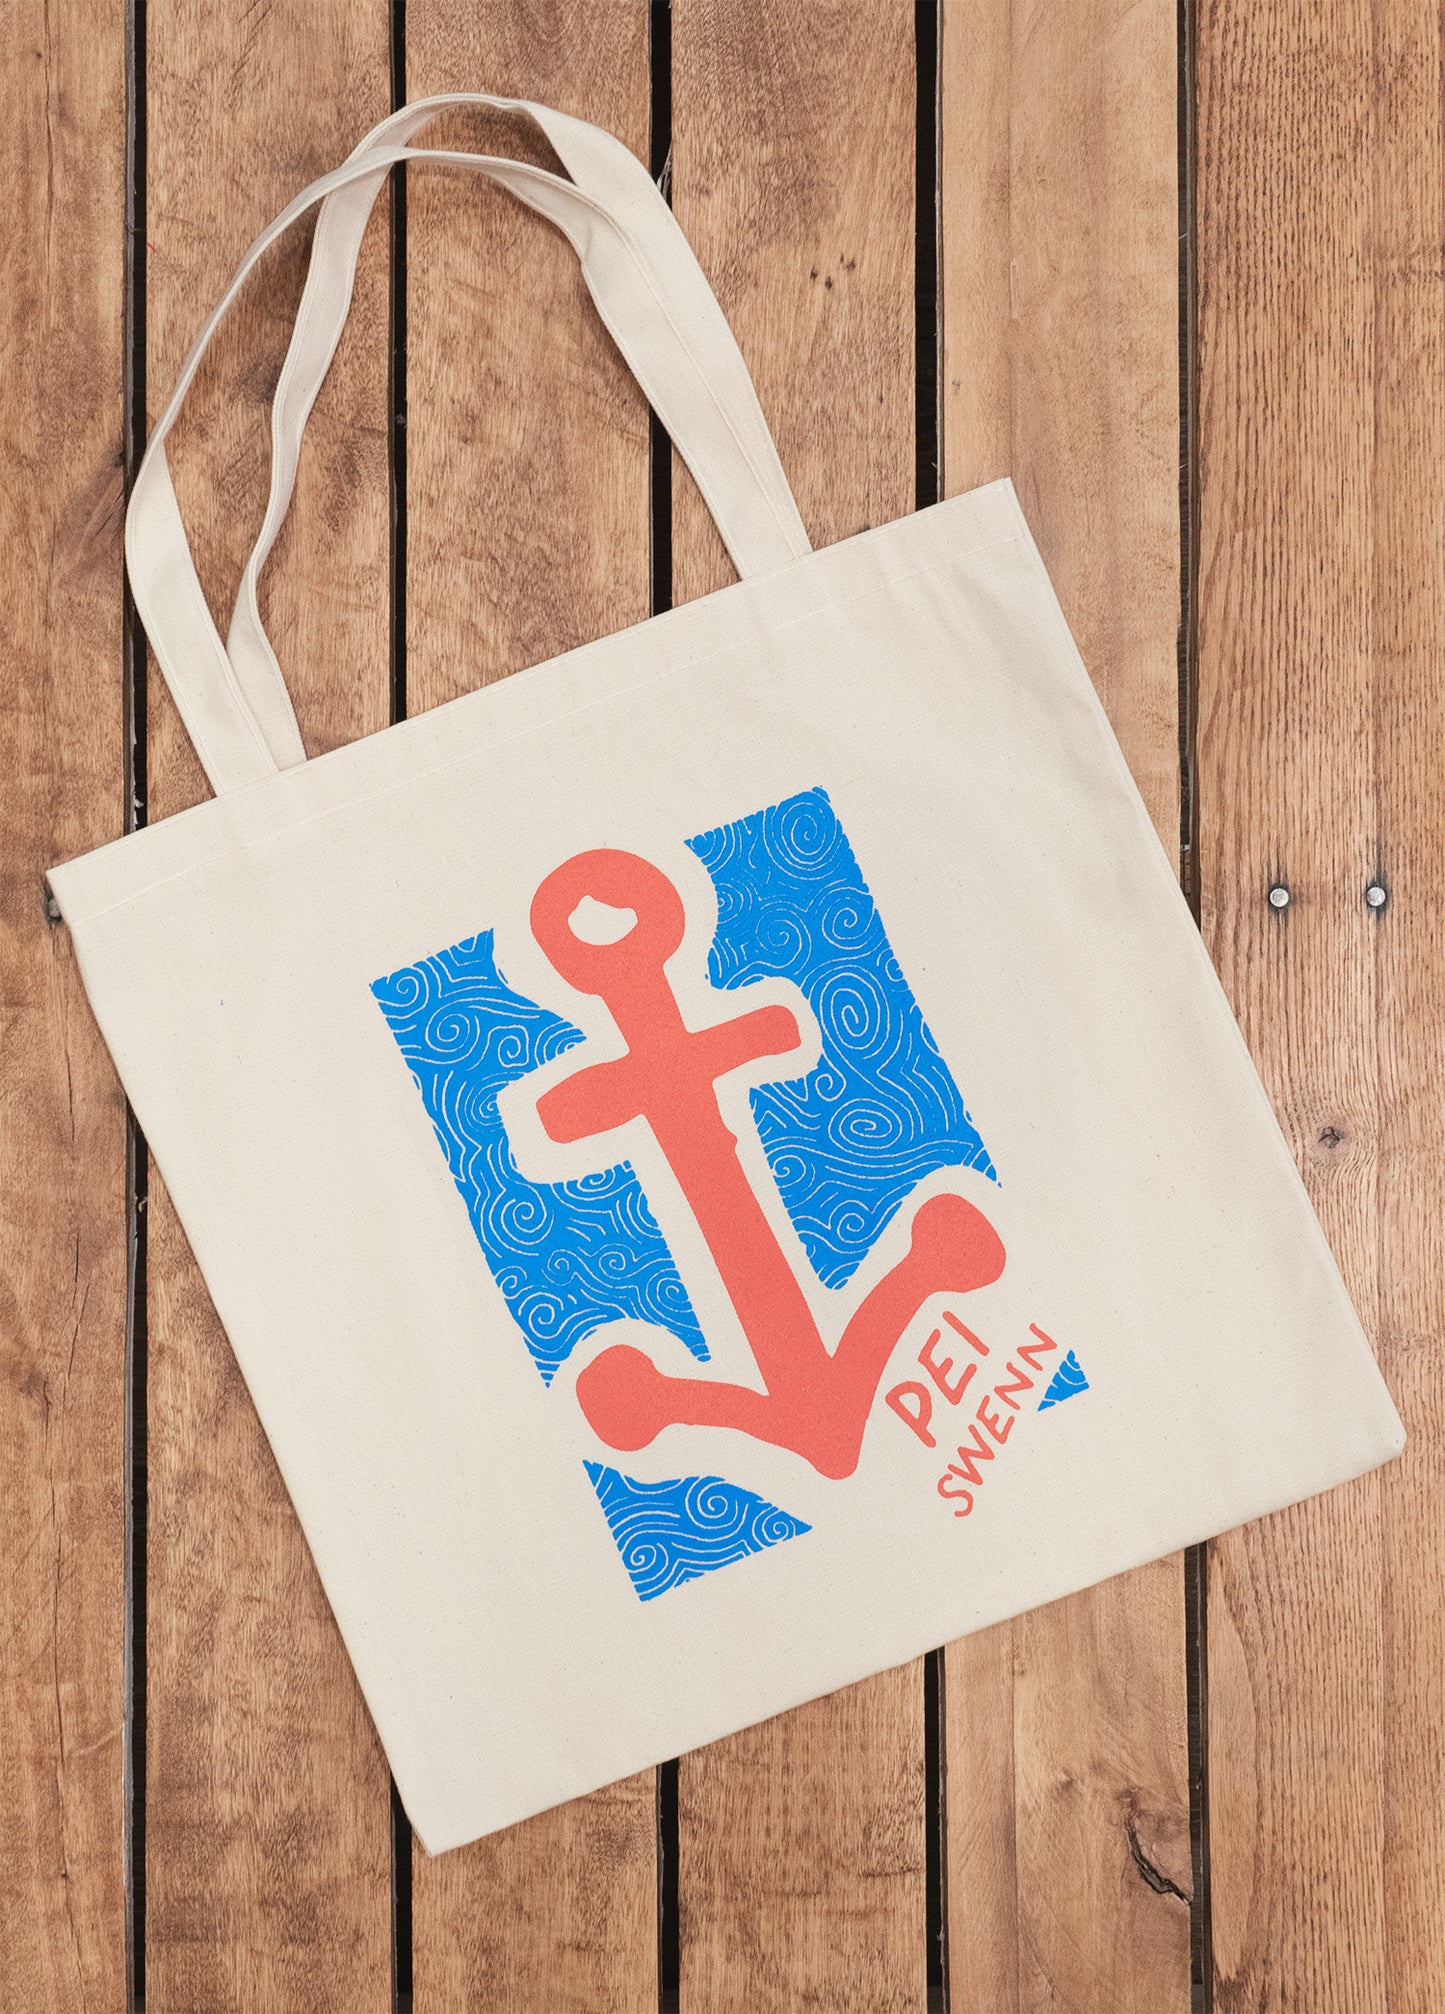 New Cotton totebag - The PEI Anchor